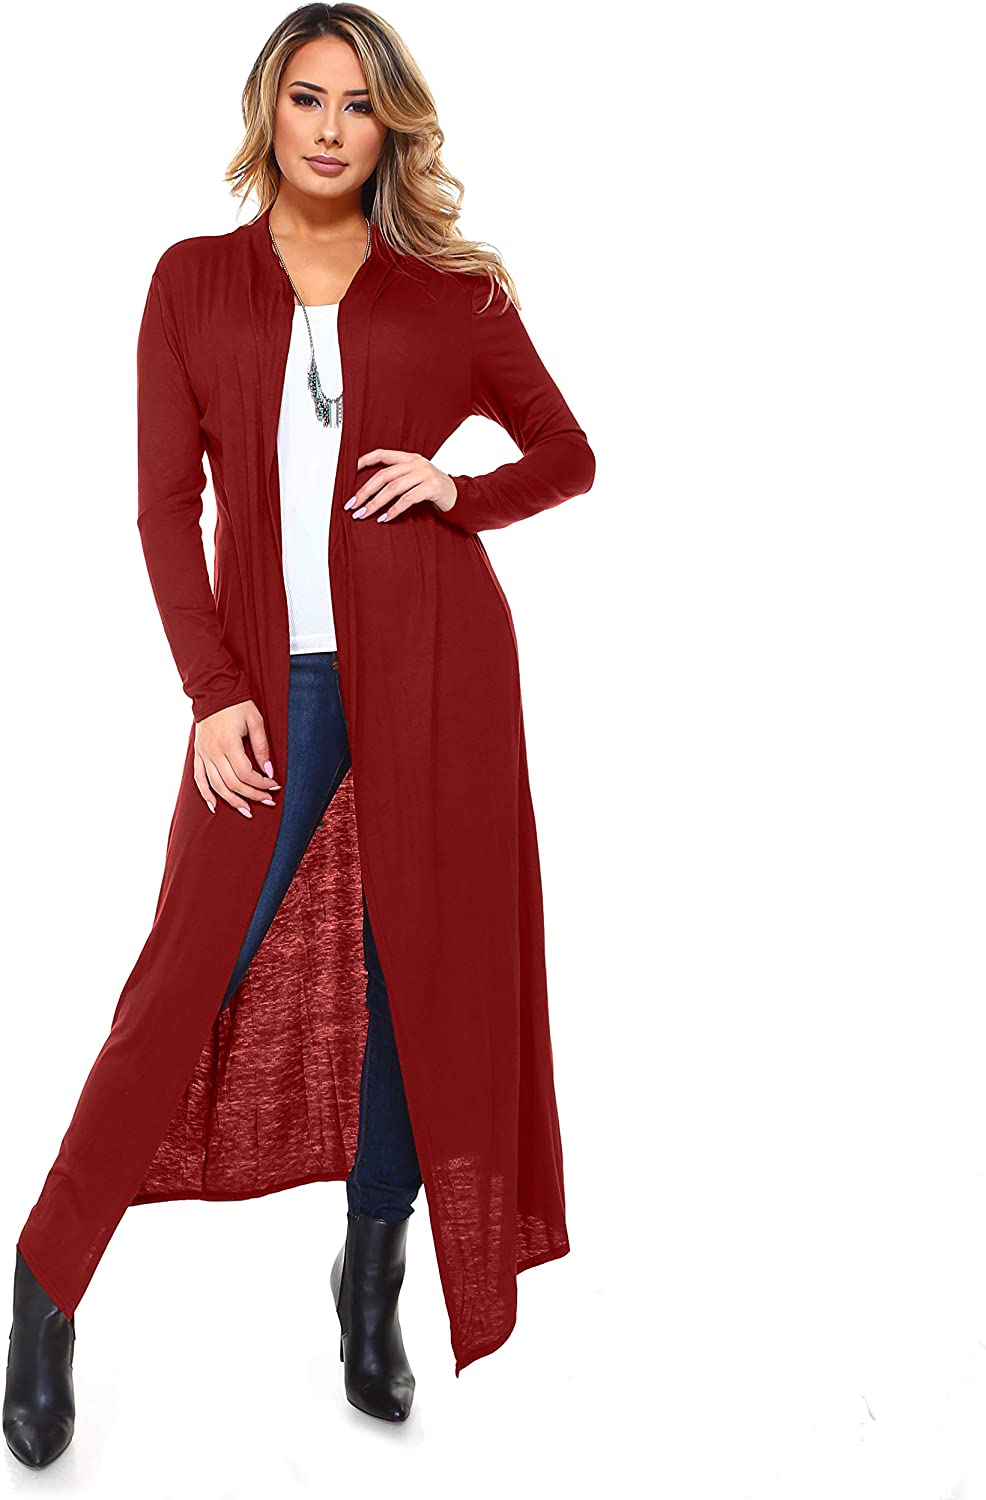 Isaac Liev Women's Maxi Cardigan – Casual Long Flowy Open Front Floor  Length Drape Lightweight Duster Sweater Made in USA